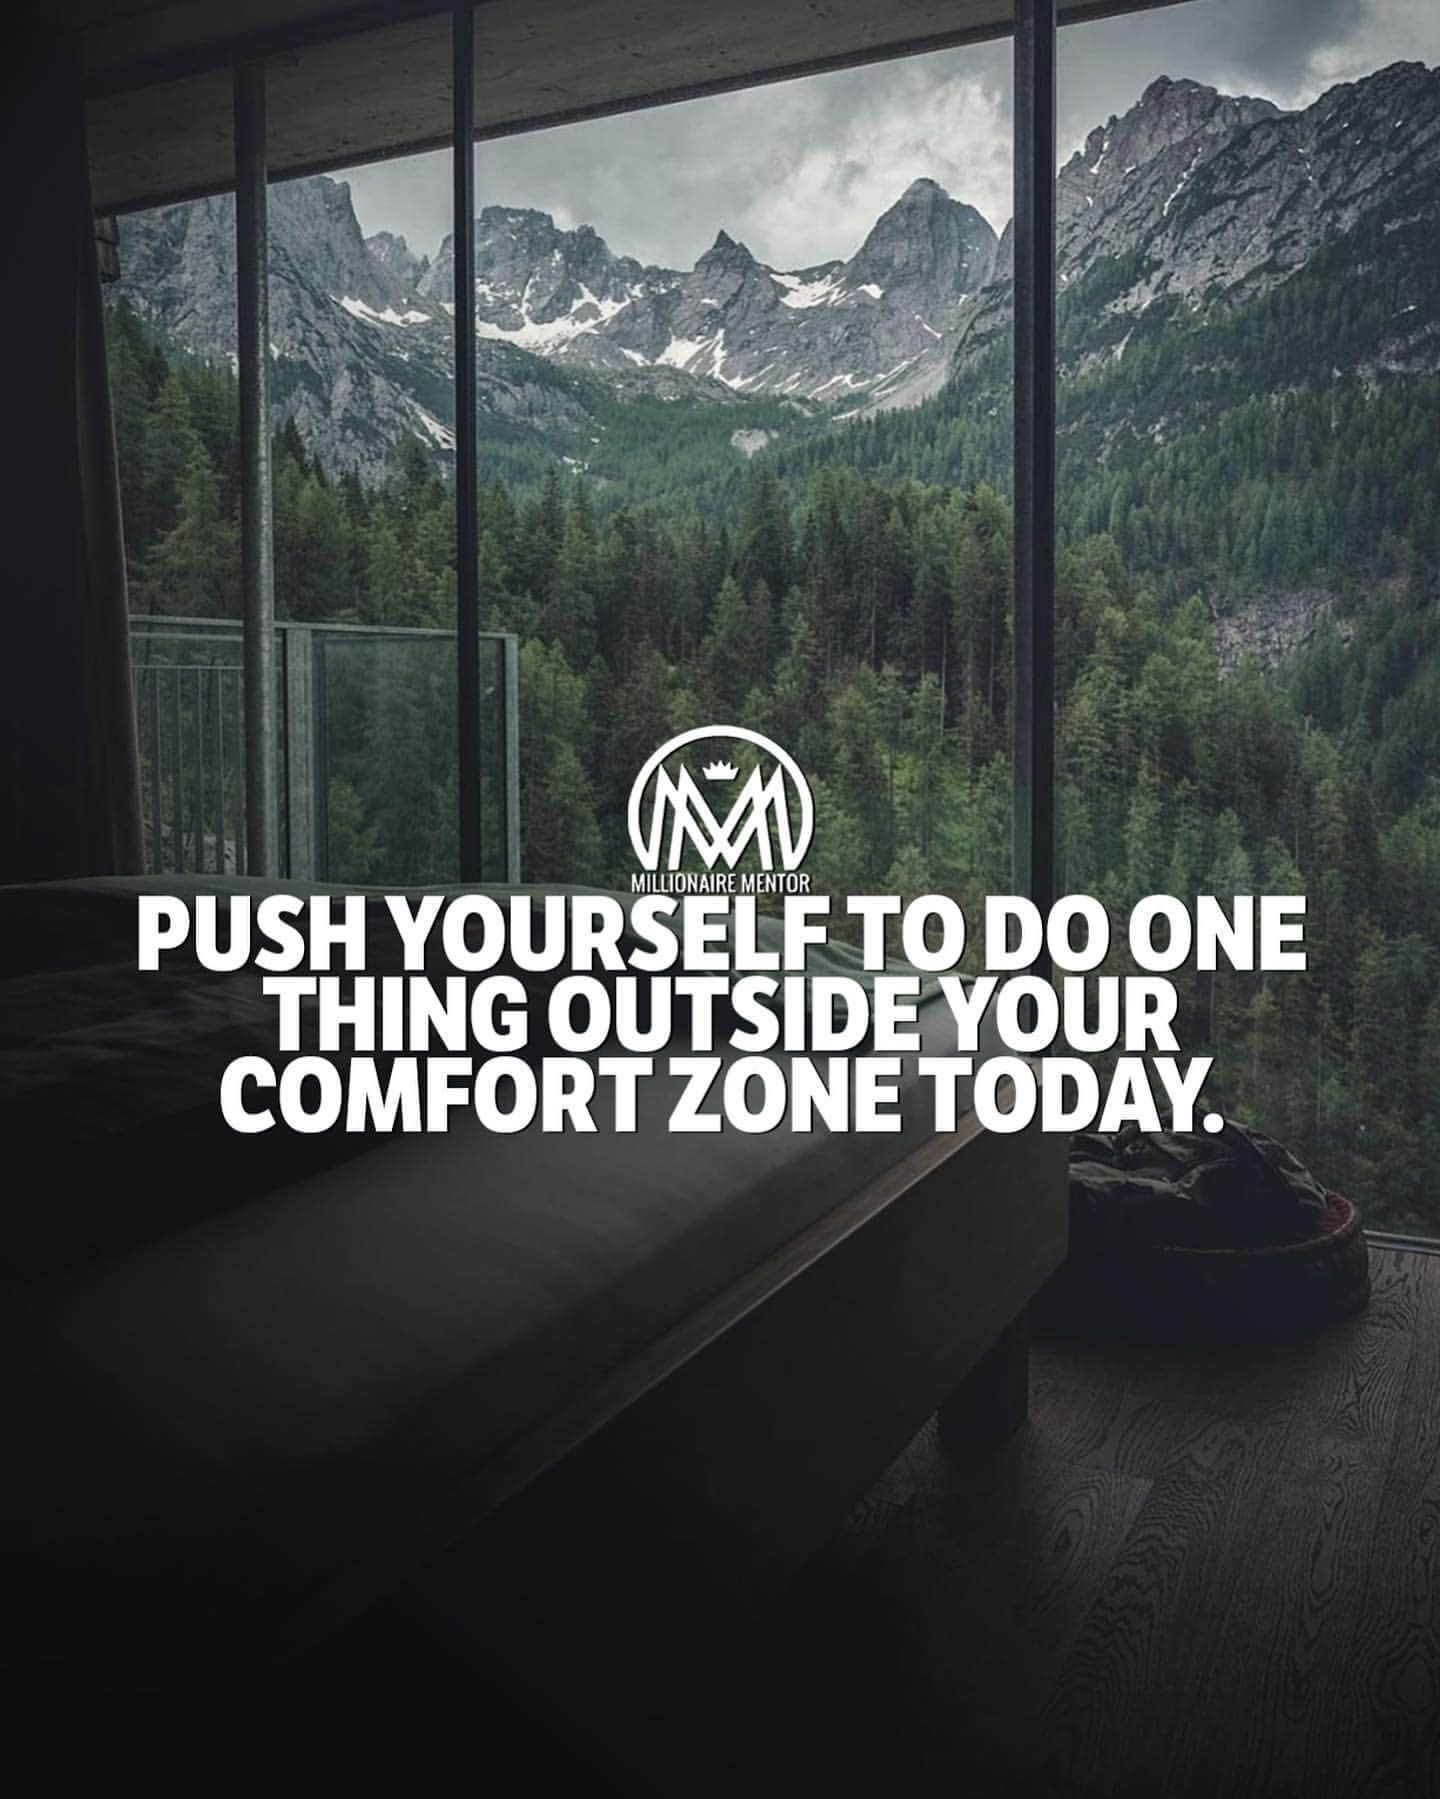 Comfort zone quotes, quotes image, quotes photo, today motivation. Millionaire mentor, Comfort zone quotes, Today quotes